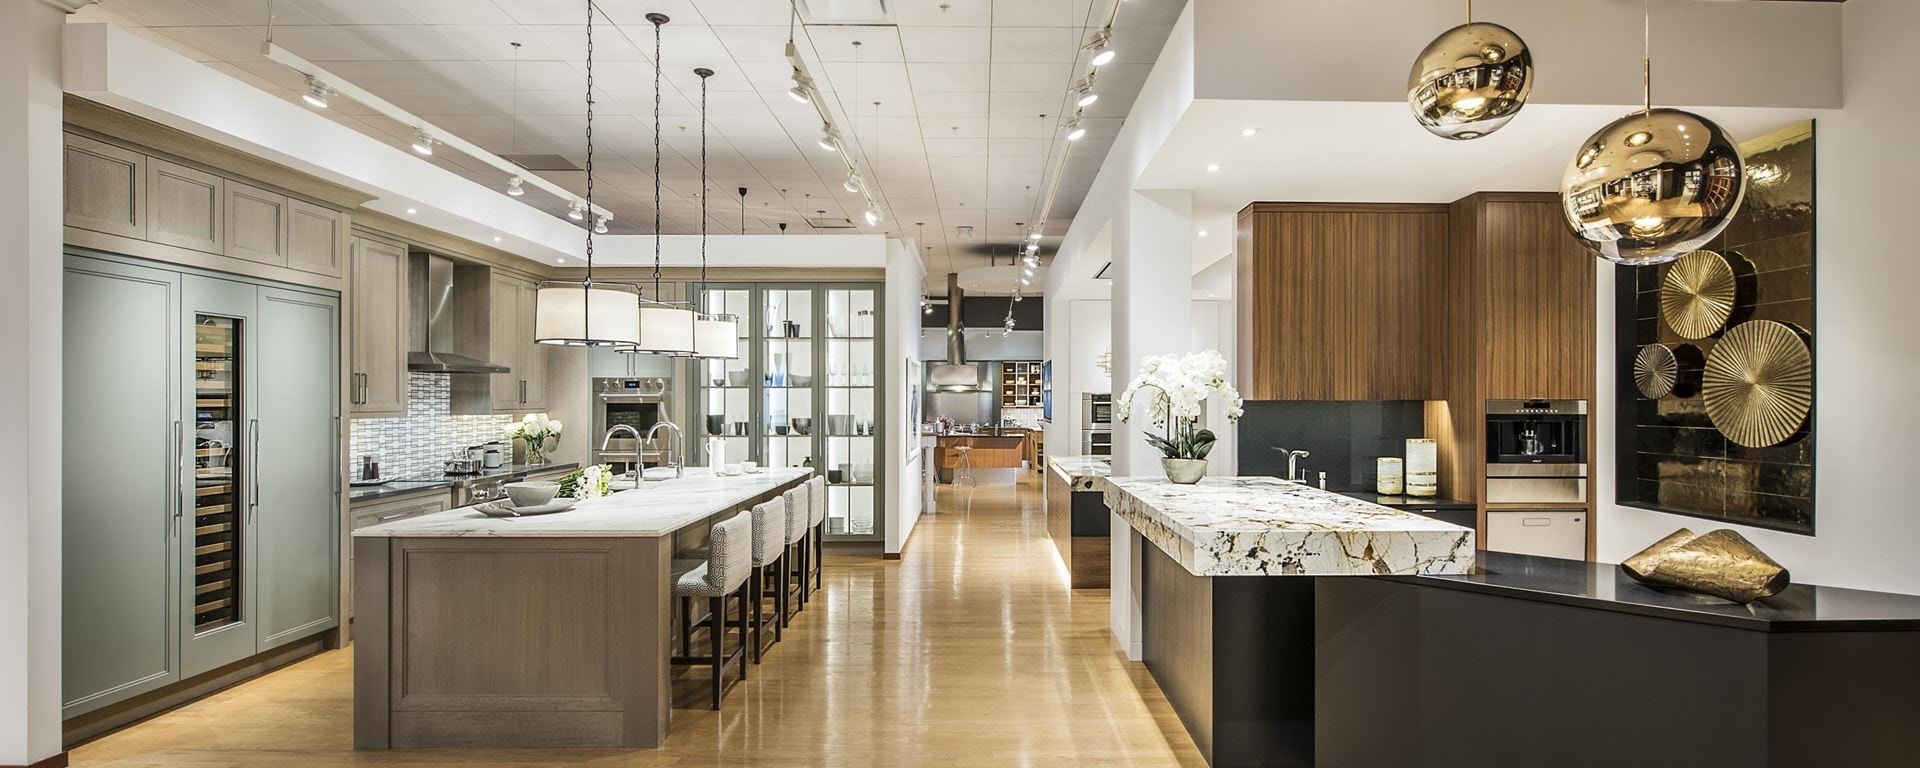 Explore luxury kitchen appliances in person at the Sub-Zero, Wolf, and Cove Showroom located in Columbia, Maryland